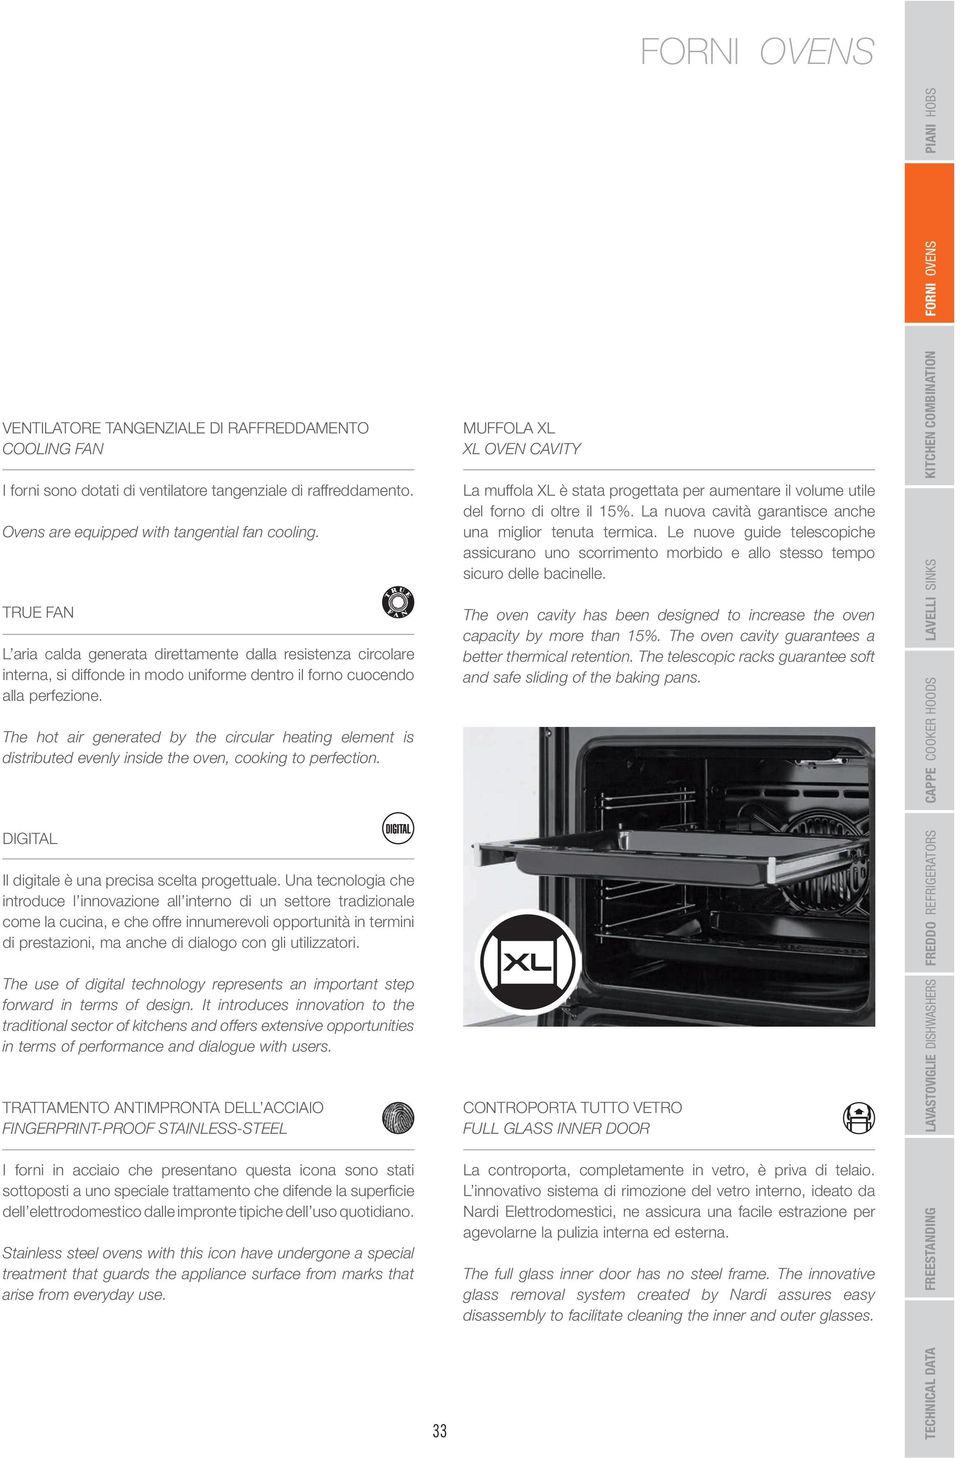 The hot air generated by the circular heating element is distributed evenly inside the oven, cooking to perfection. DIGITAL Il digitale è una precisa scelta progettuale.